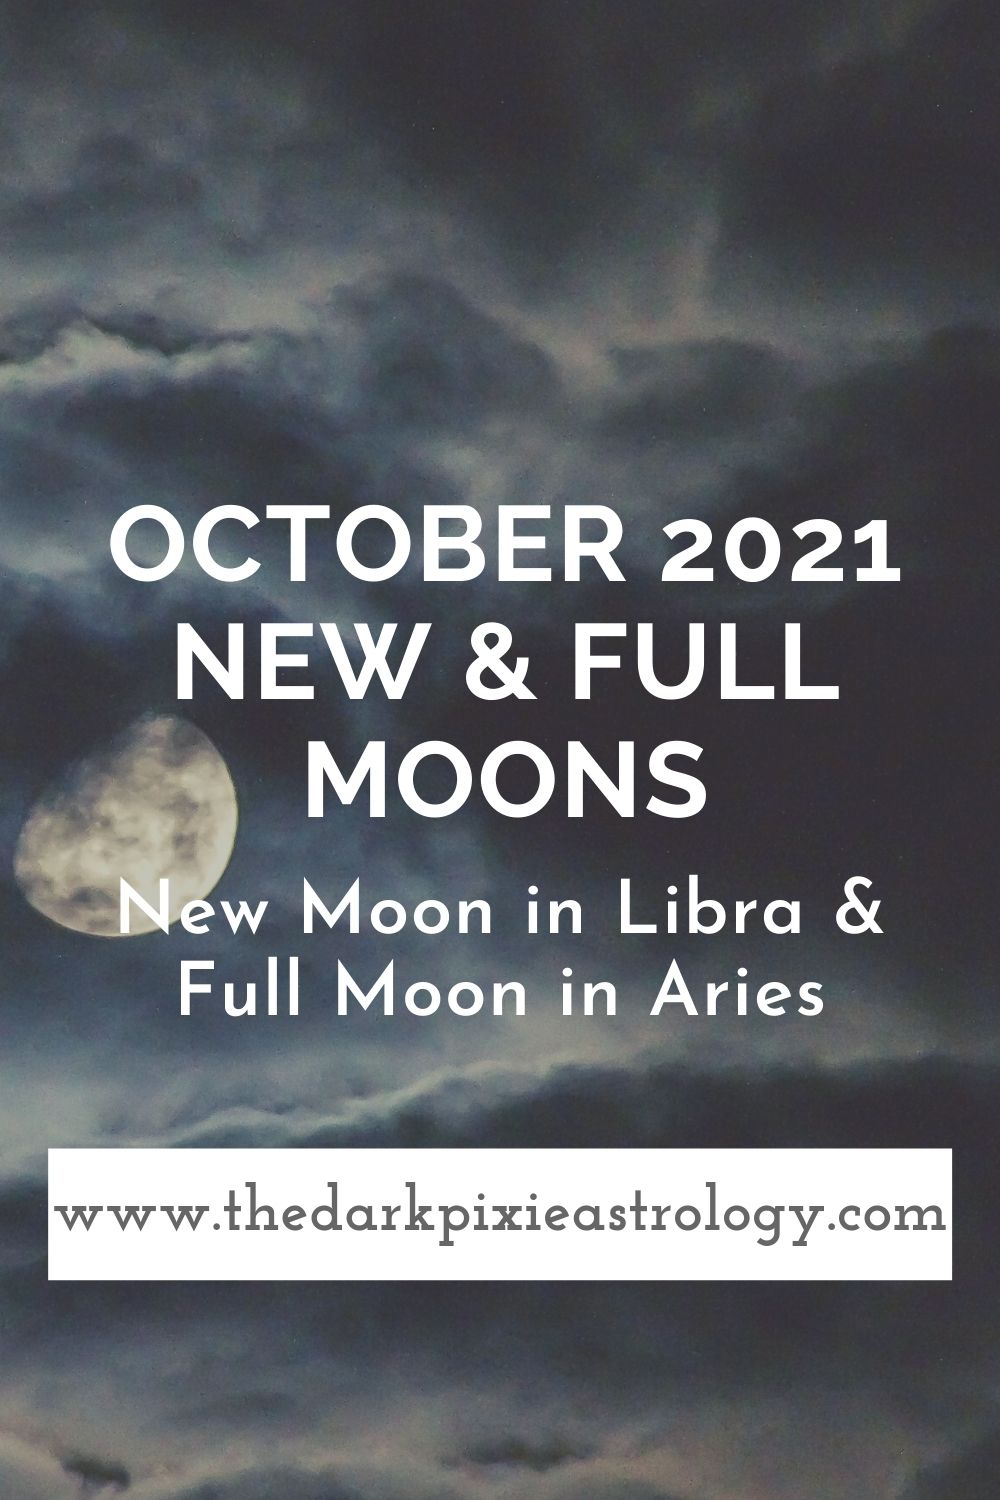 October 2021 New & Full Moons: New Moon in Libra & Full Moon in Aries - The Dark Pixie Astrology